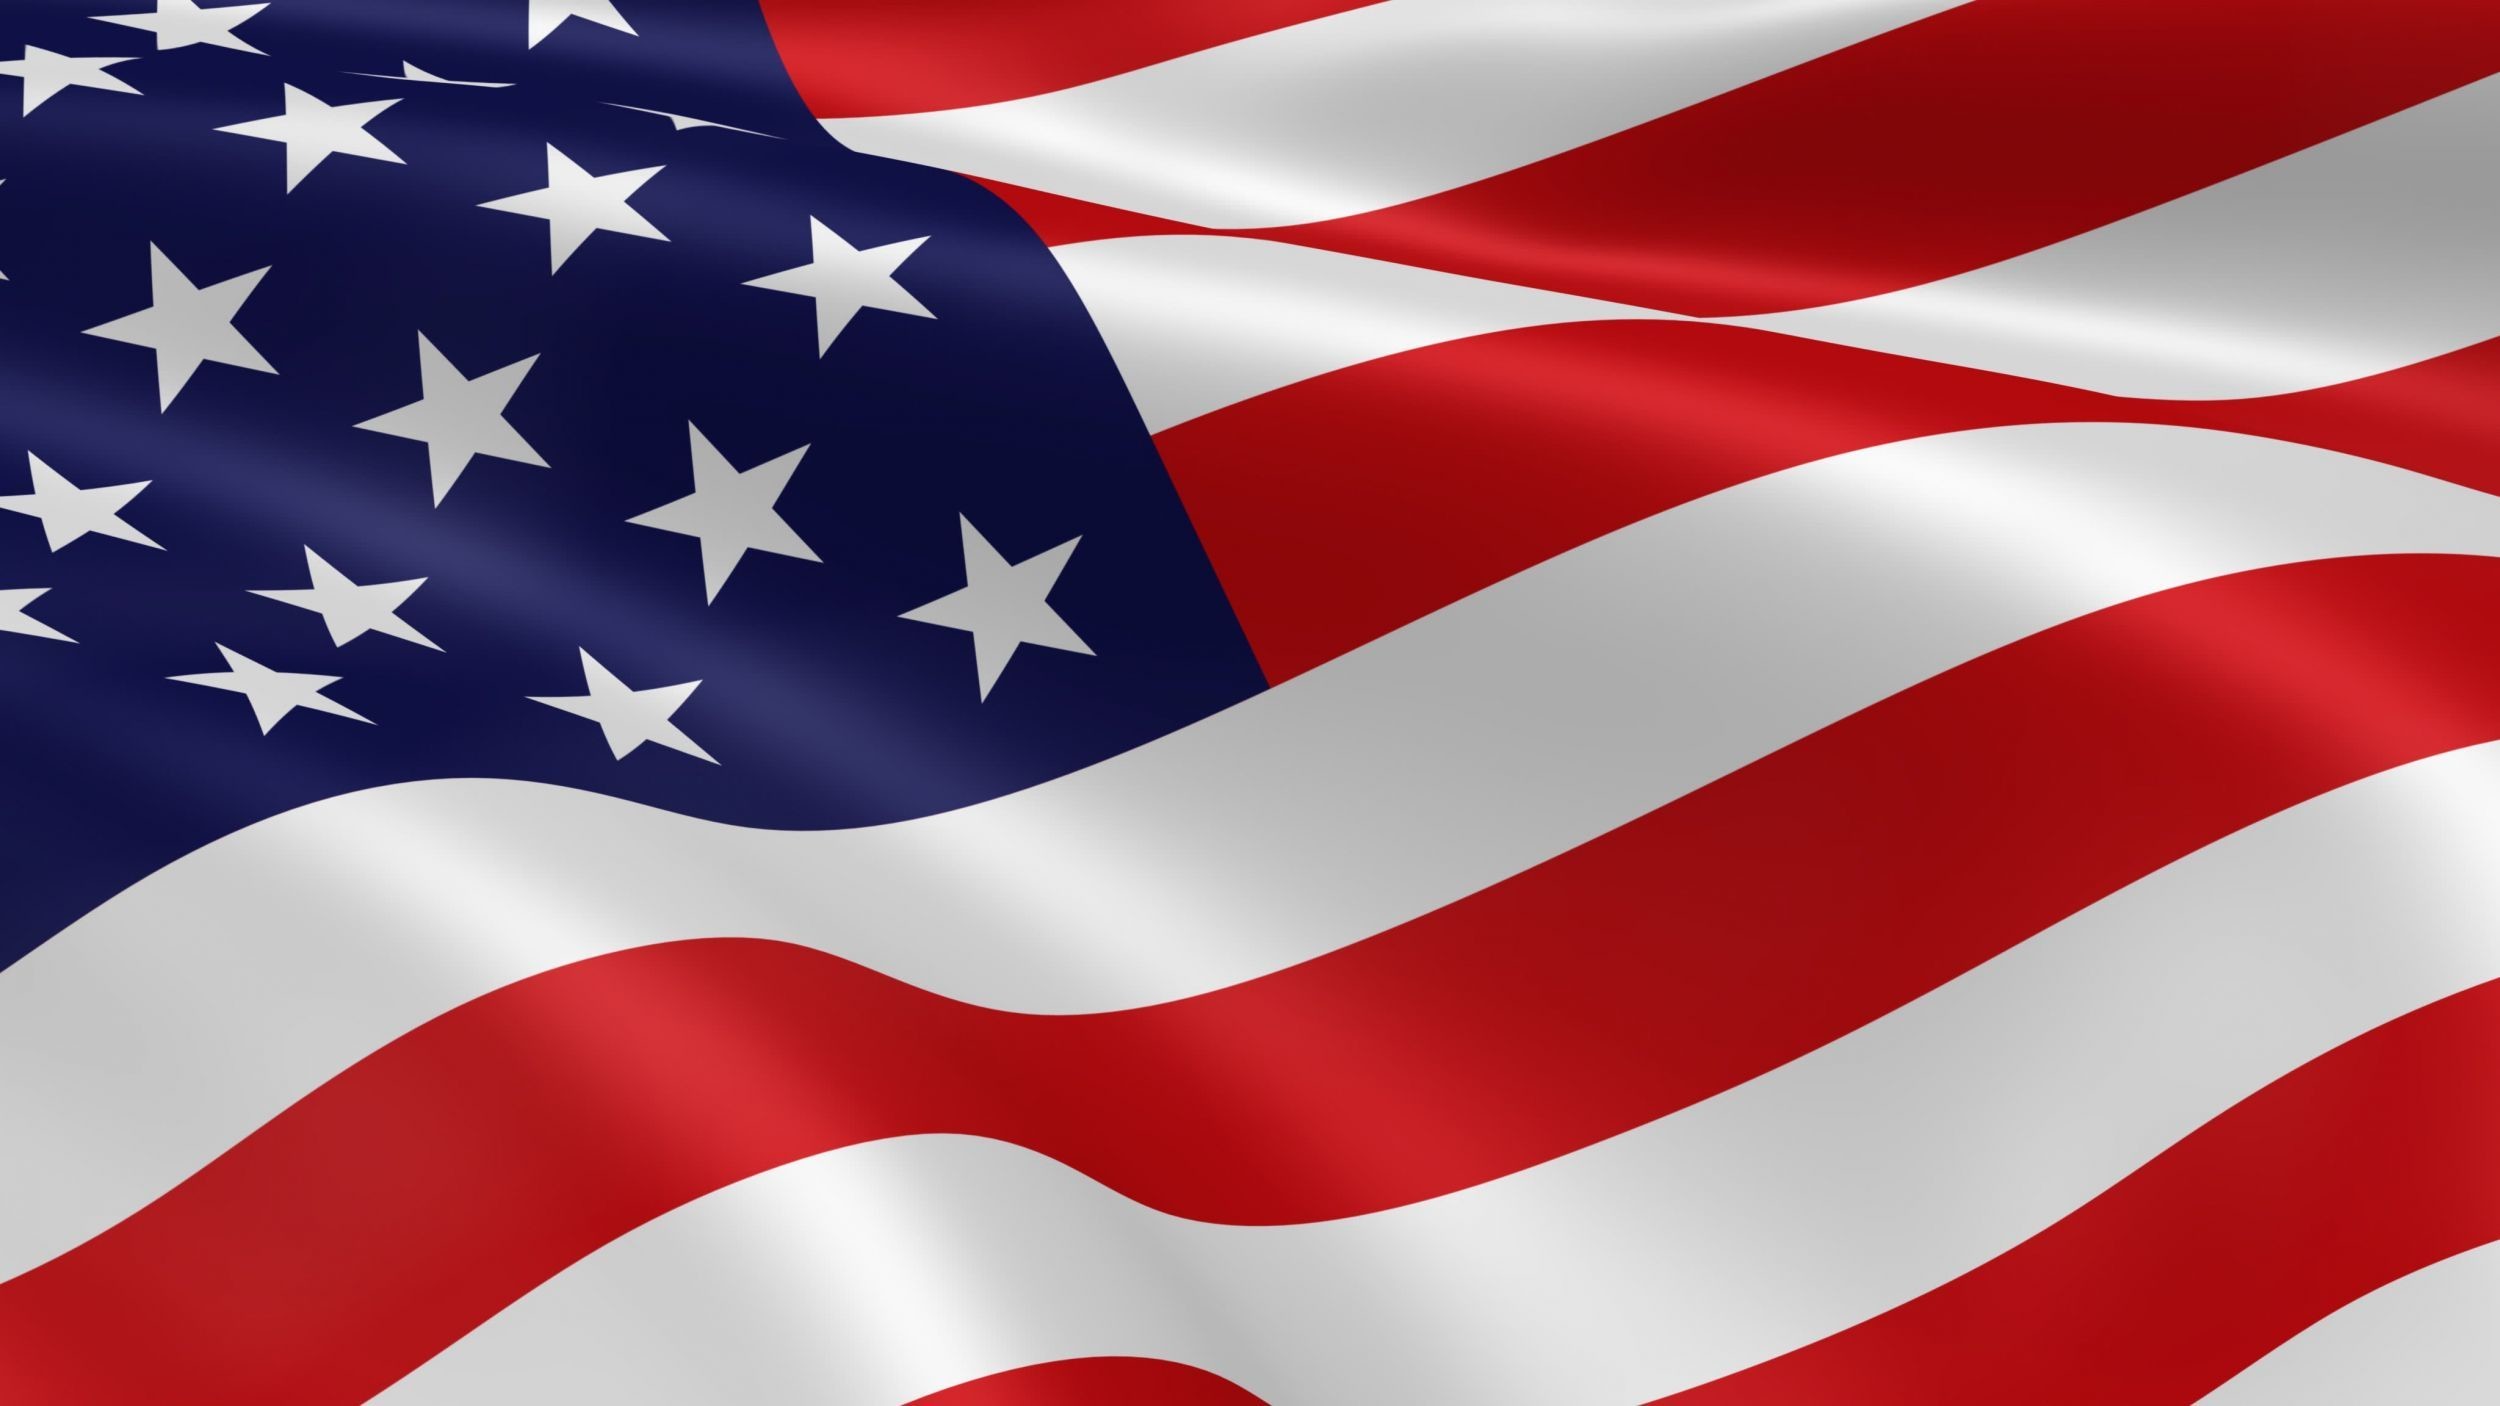 2500x1406 Wallpapers of American Flag FHDQ for PC & Mac, Tablet, Laptop, Mobile